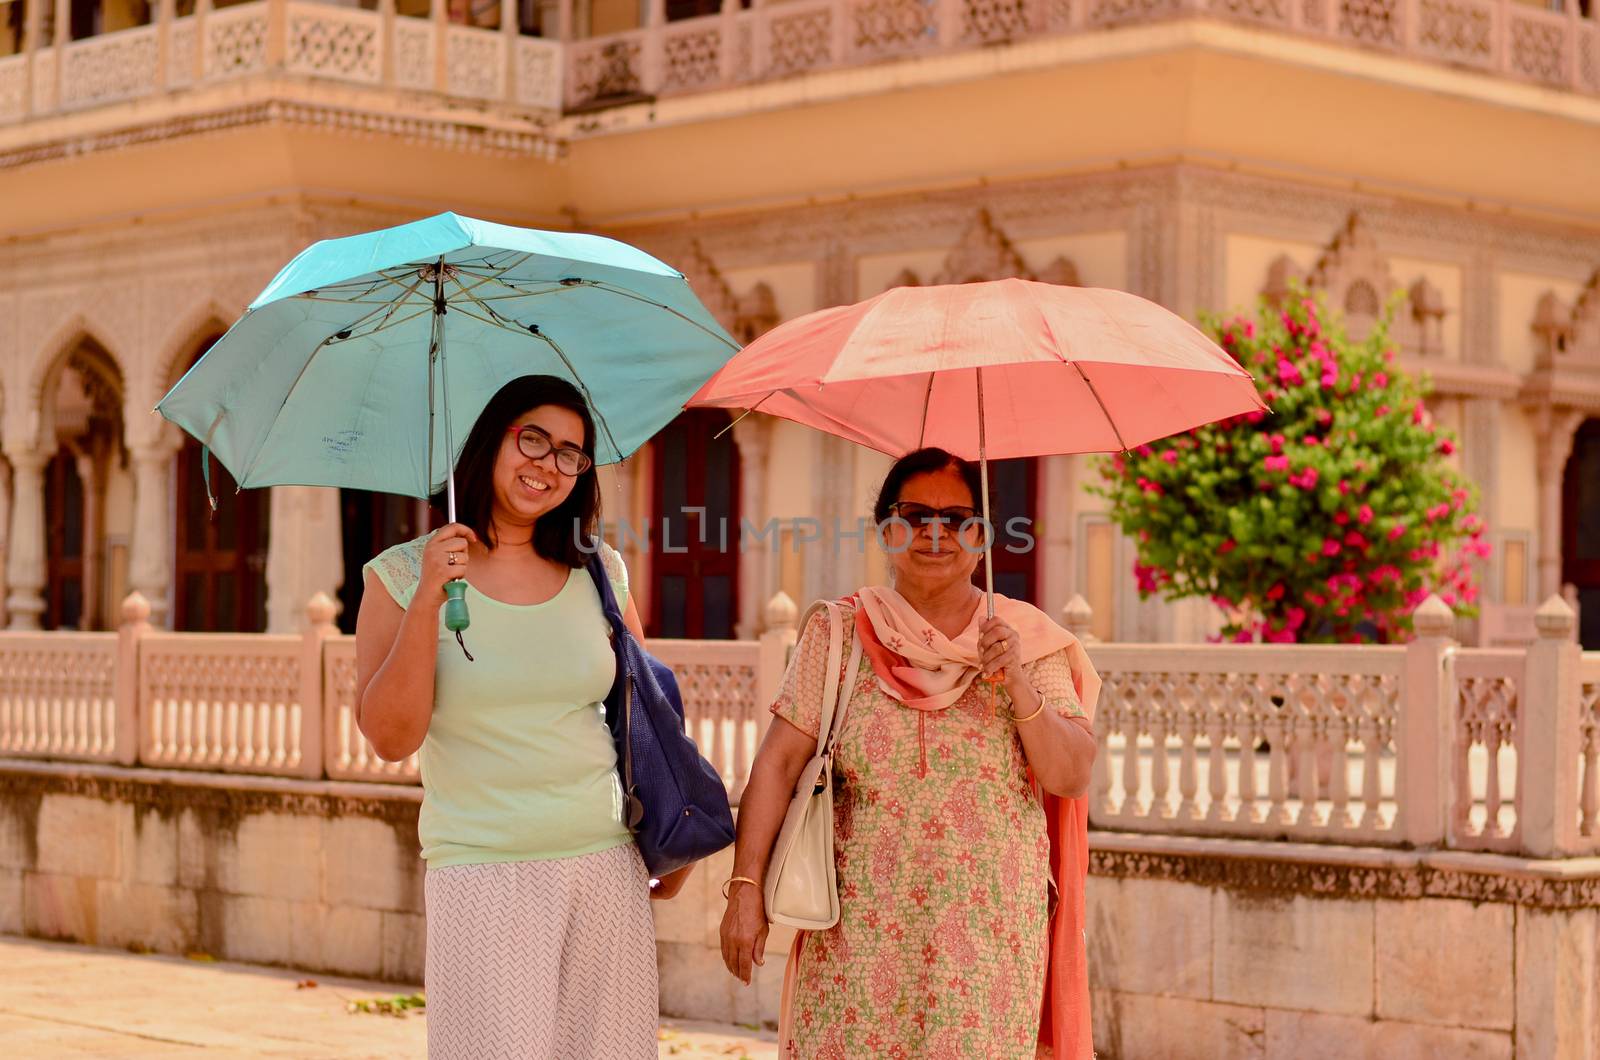 Happy looking young and old (mother - daughter) tourists posing in Jaipur's City Palace with umbrellas matching their outfits in City Palace, Jaipur, Rajasthan, India by jayantbahel